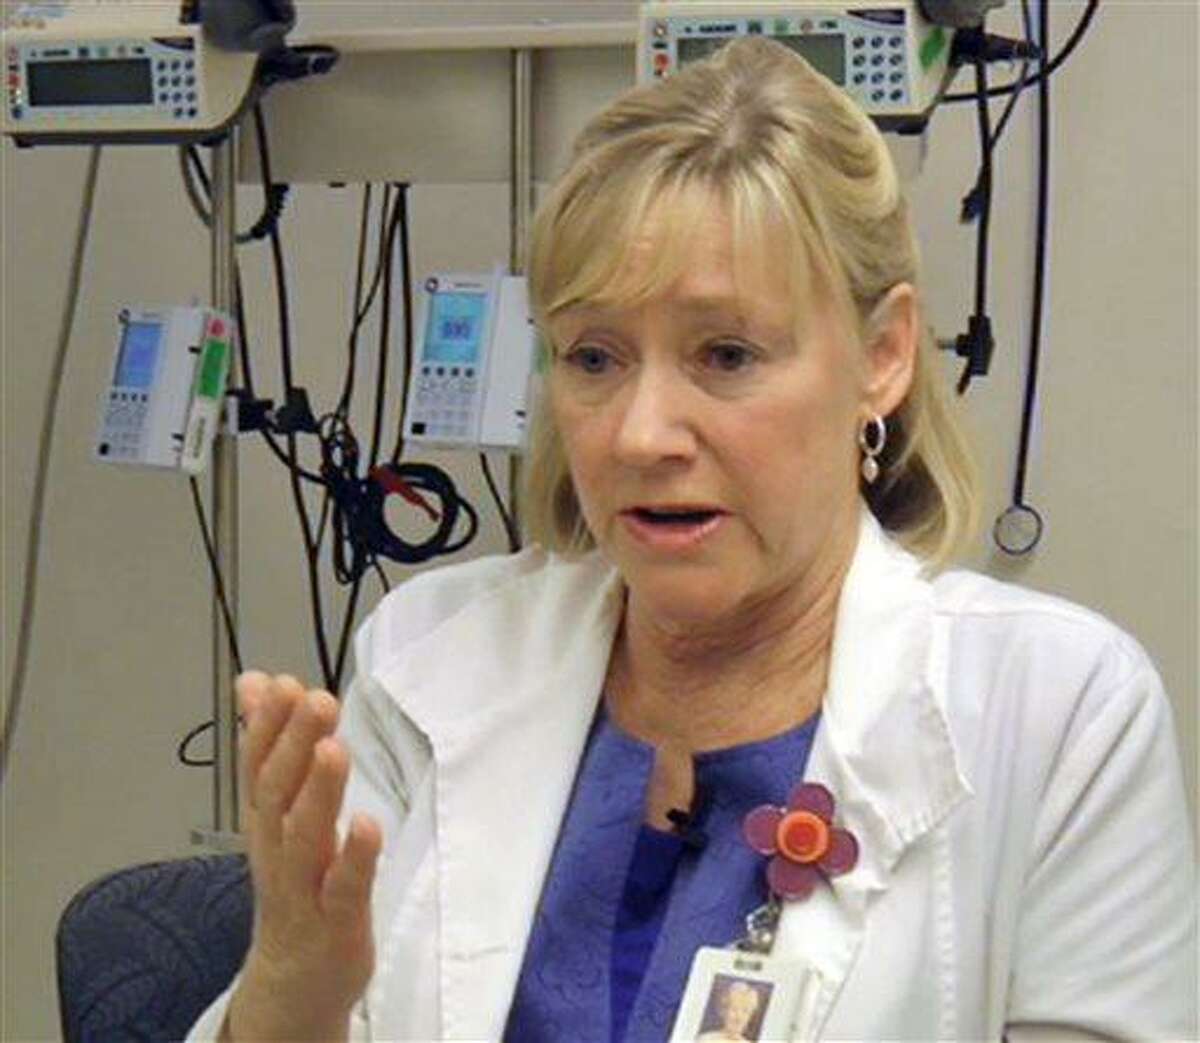 In this frame grab from Saturday, April 20, 2013, video, Massachusetts General Hospital nurse Jean Acquadra talks about the horrific early hours as bloody patients poured in after the explosions at the Boston Marathon. (AP Photo/Carla K. Johnson)